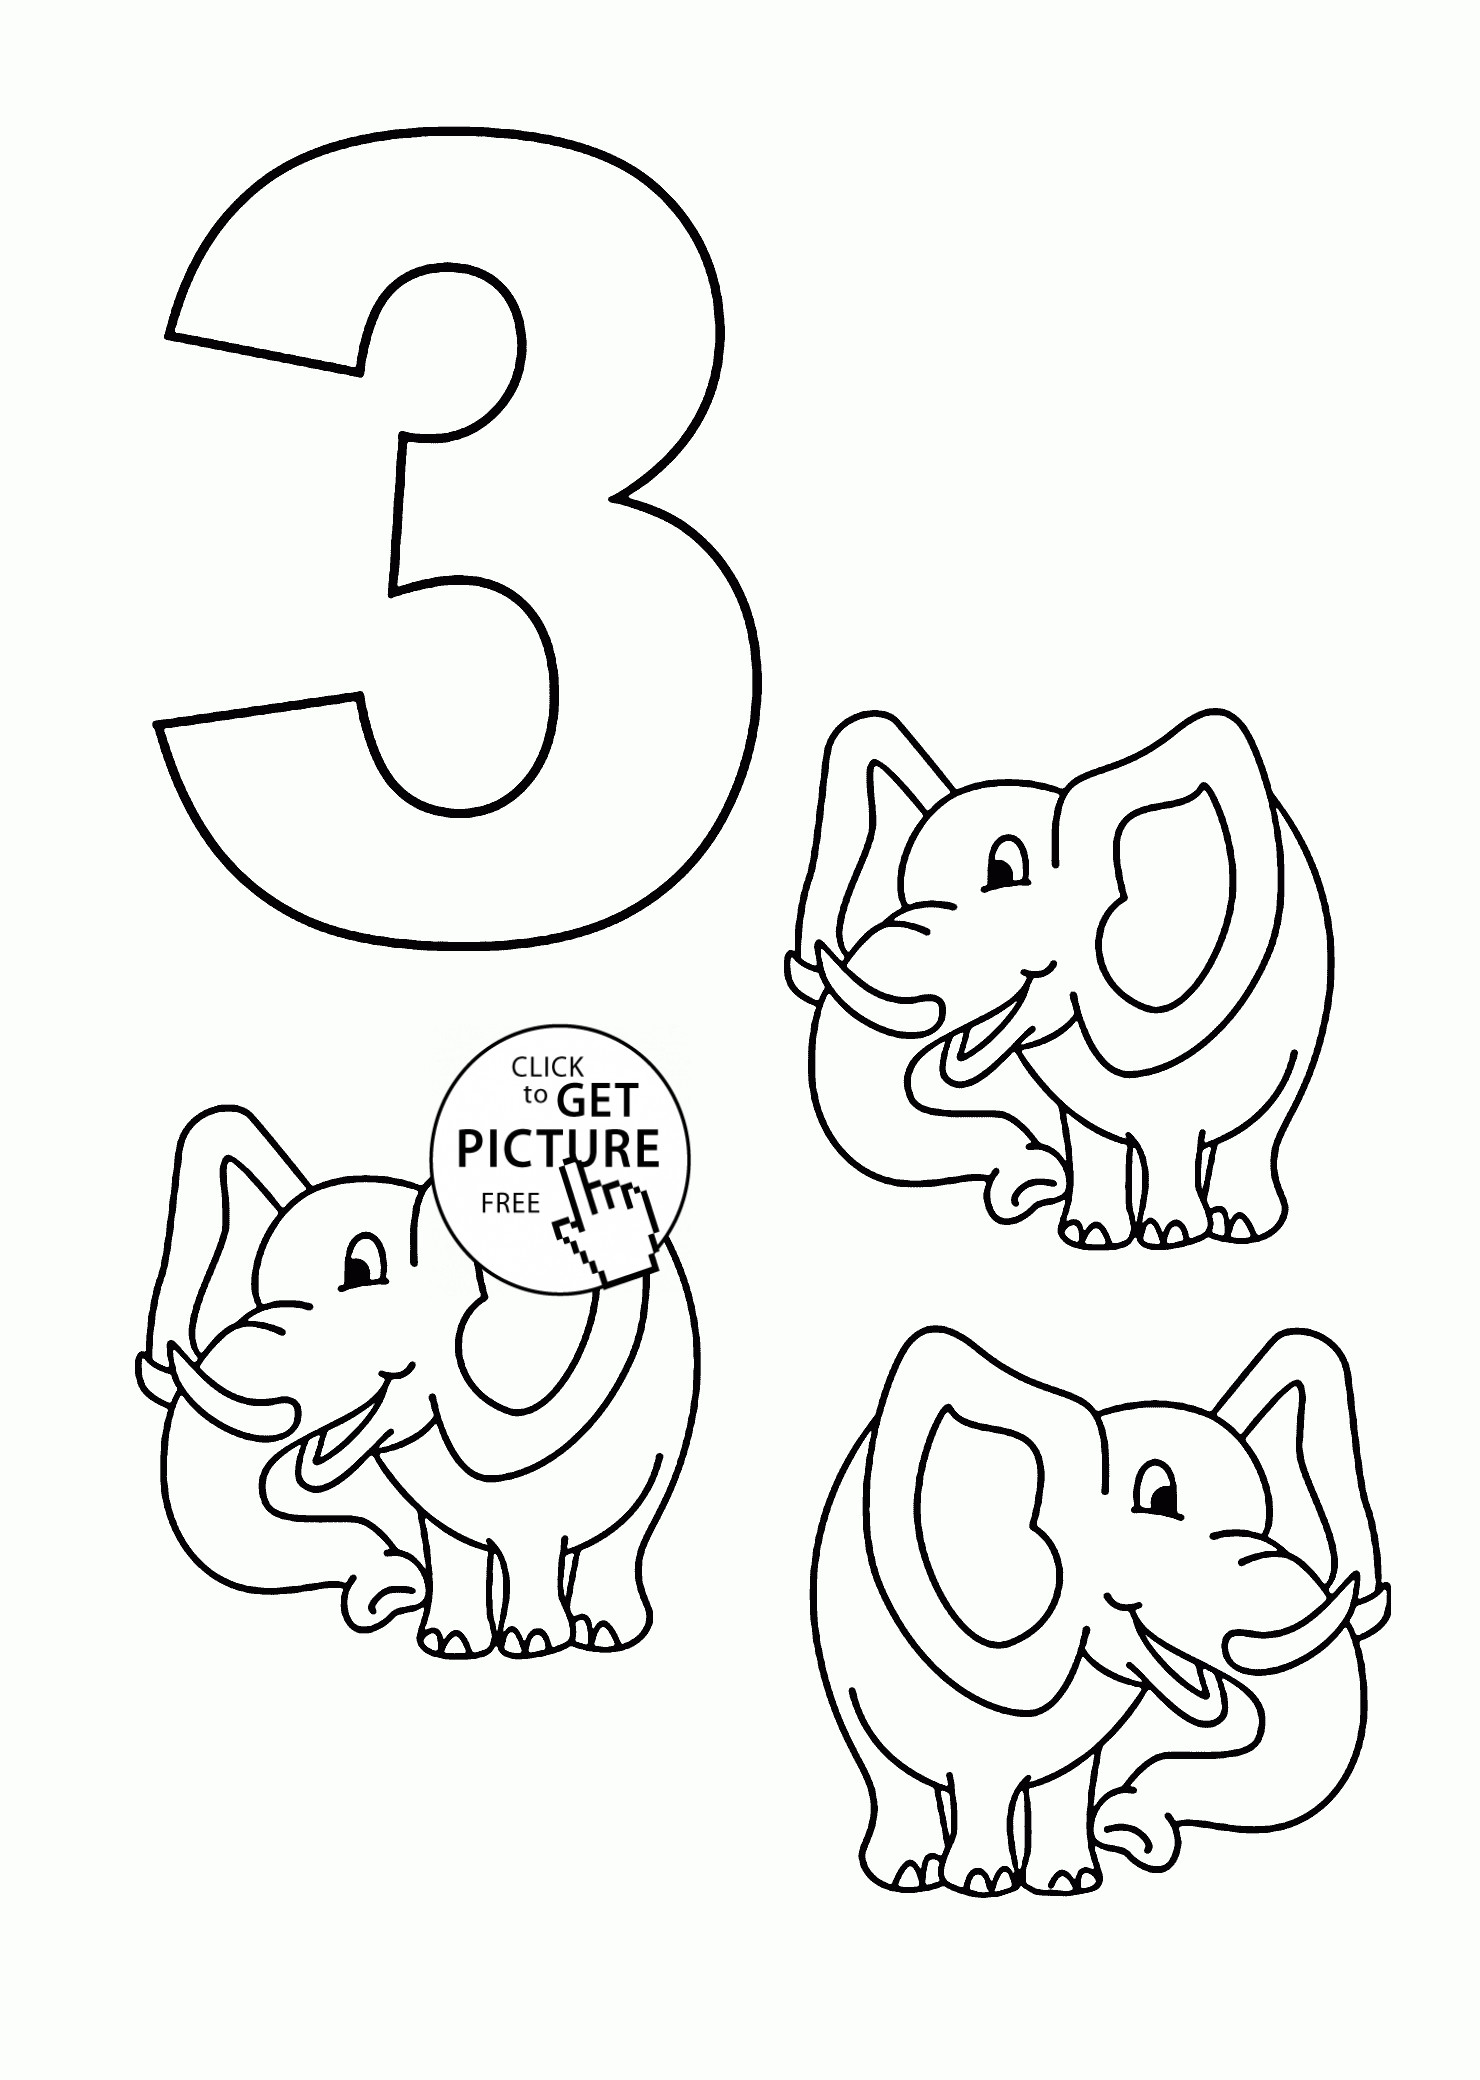 Coloring Pages For Kids Numbers
 Number 3 coloring pages for kids counting sheets